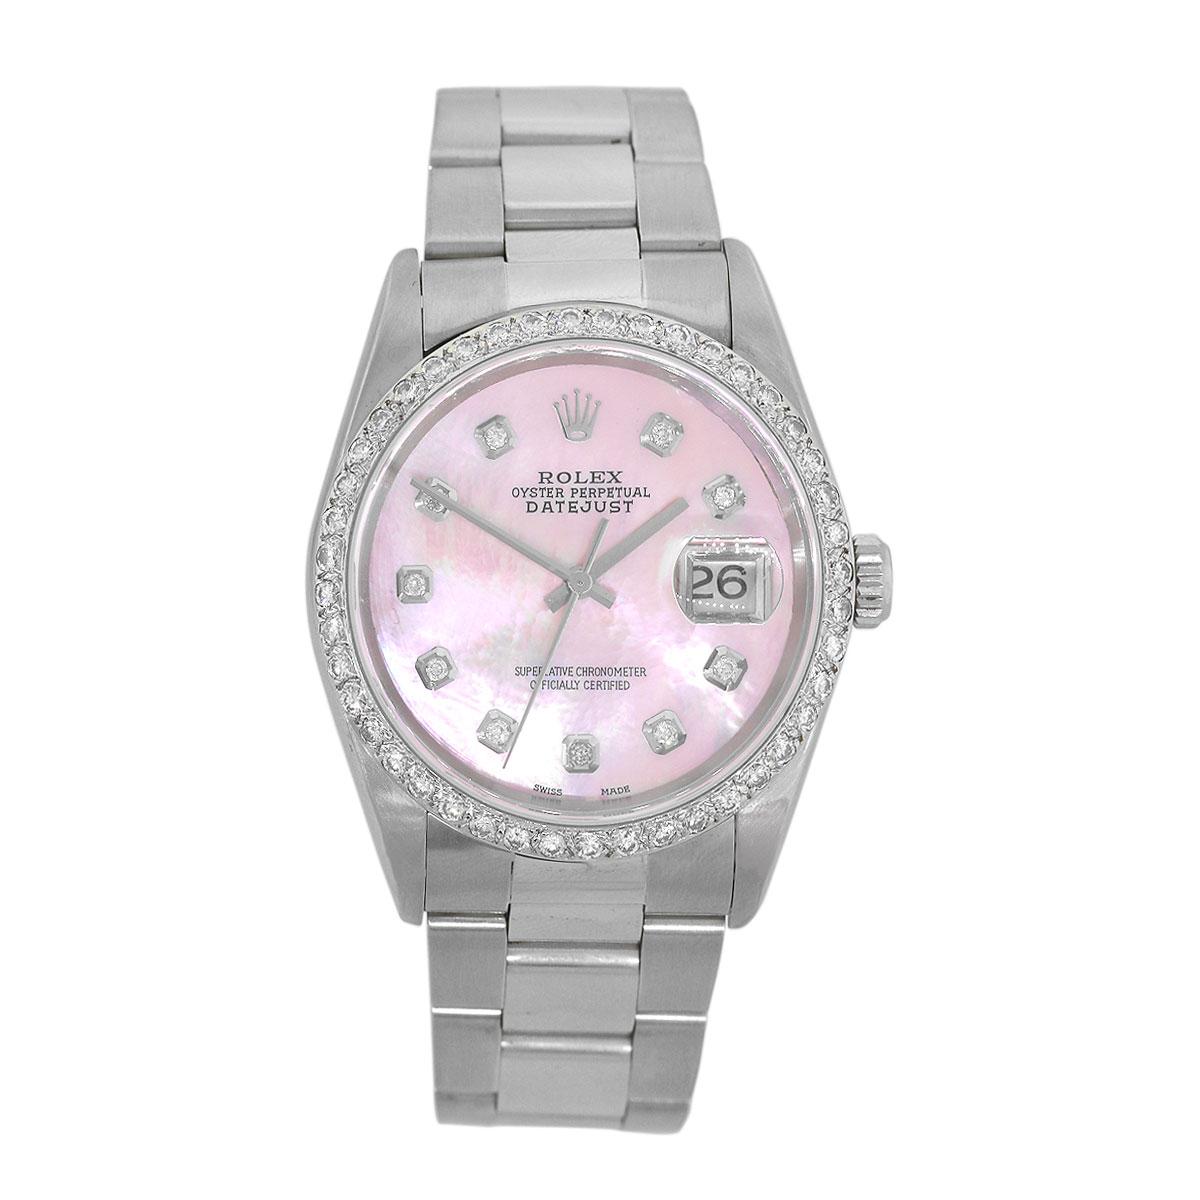 
Brand: Rolex
MPN	: 16220
Model: Datejust
Case Material: Stainless steel with no holes
Case Diameter: 36mm
Crystal: Sapphire Crystal
Bezel: Aftermarket stainless steel diamond bezel
Dial: Aftermarket mother of pearl pink Dial with silver hands and